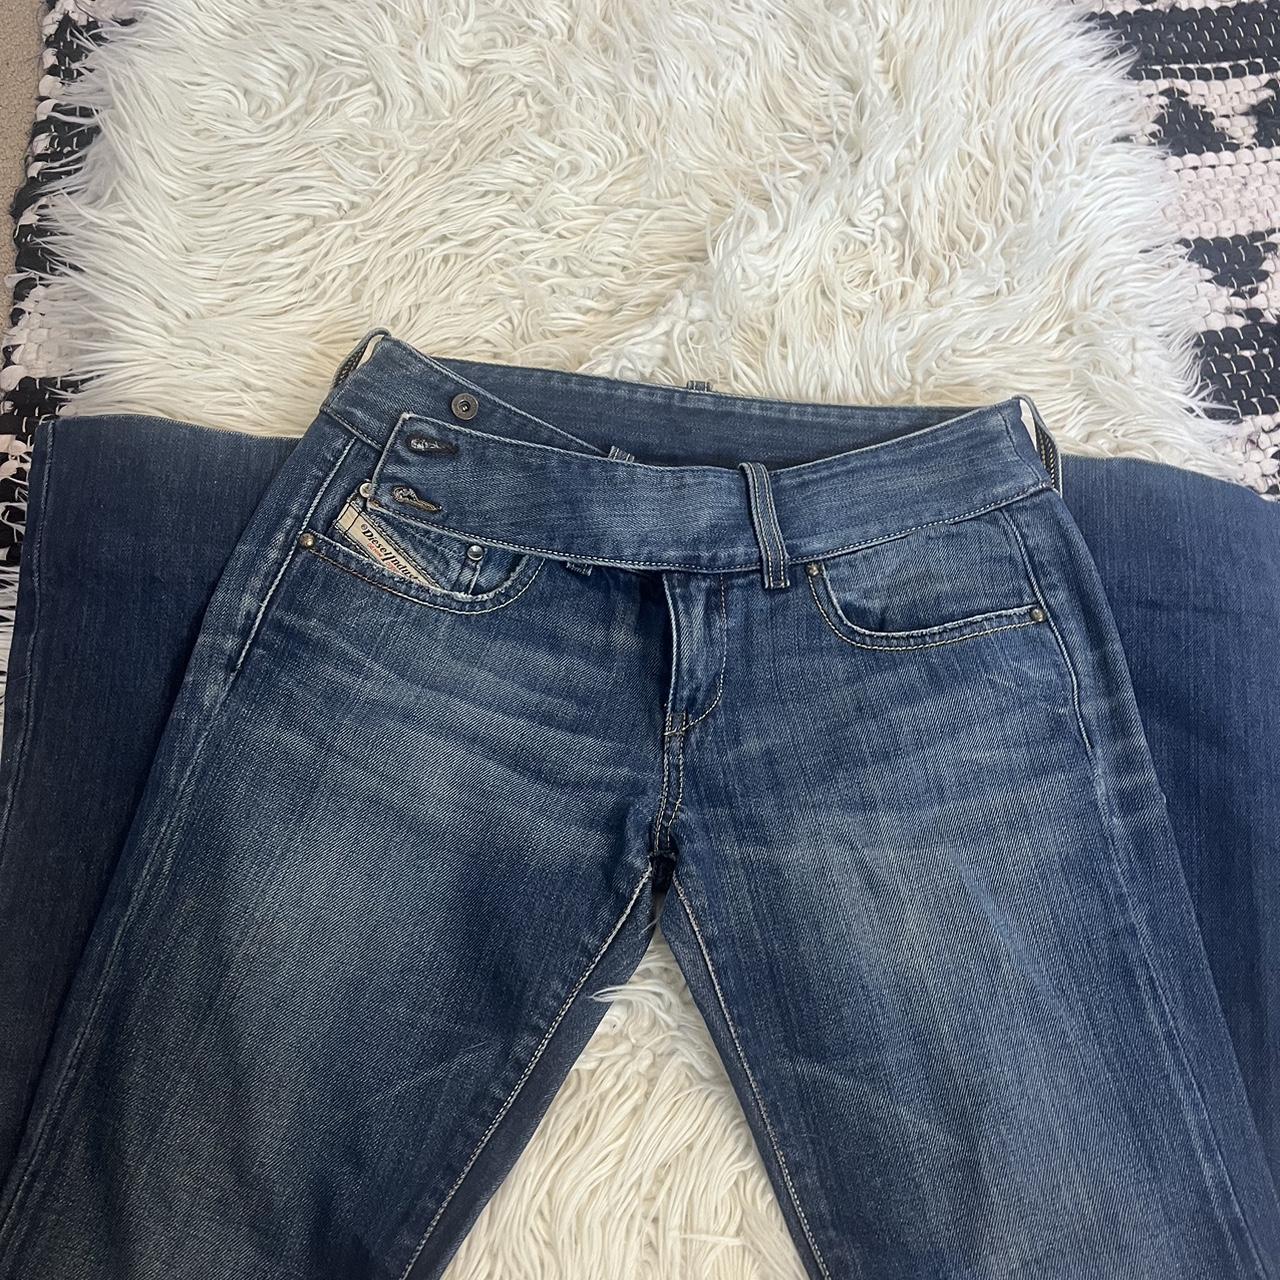 Authentic Vintage Diesel Low Rise Jeans With Depop, 54% OFF